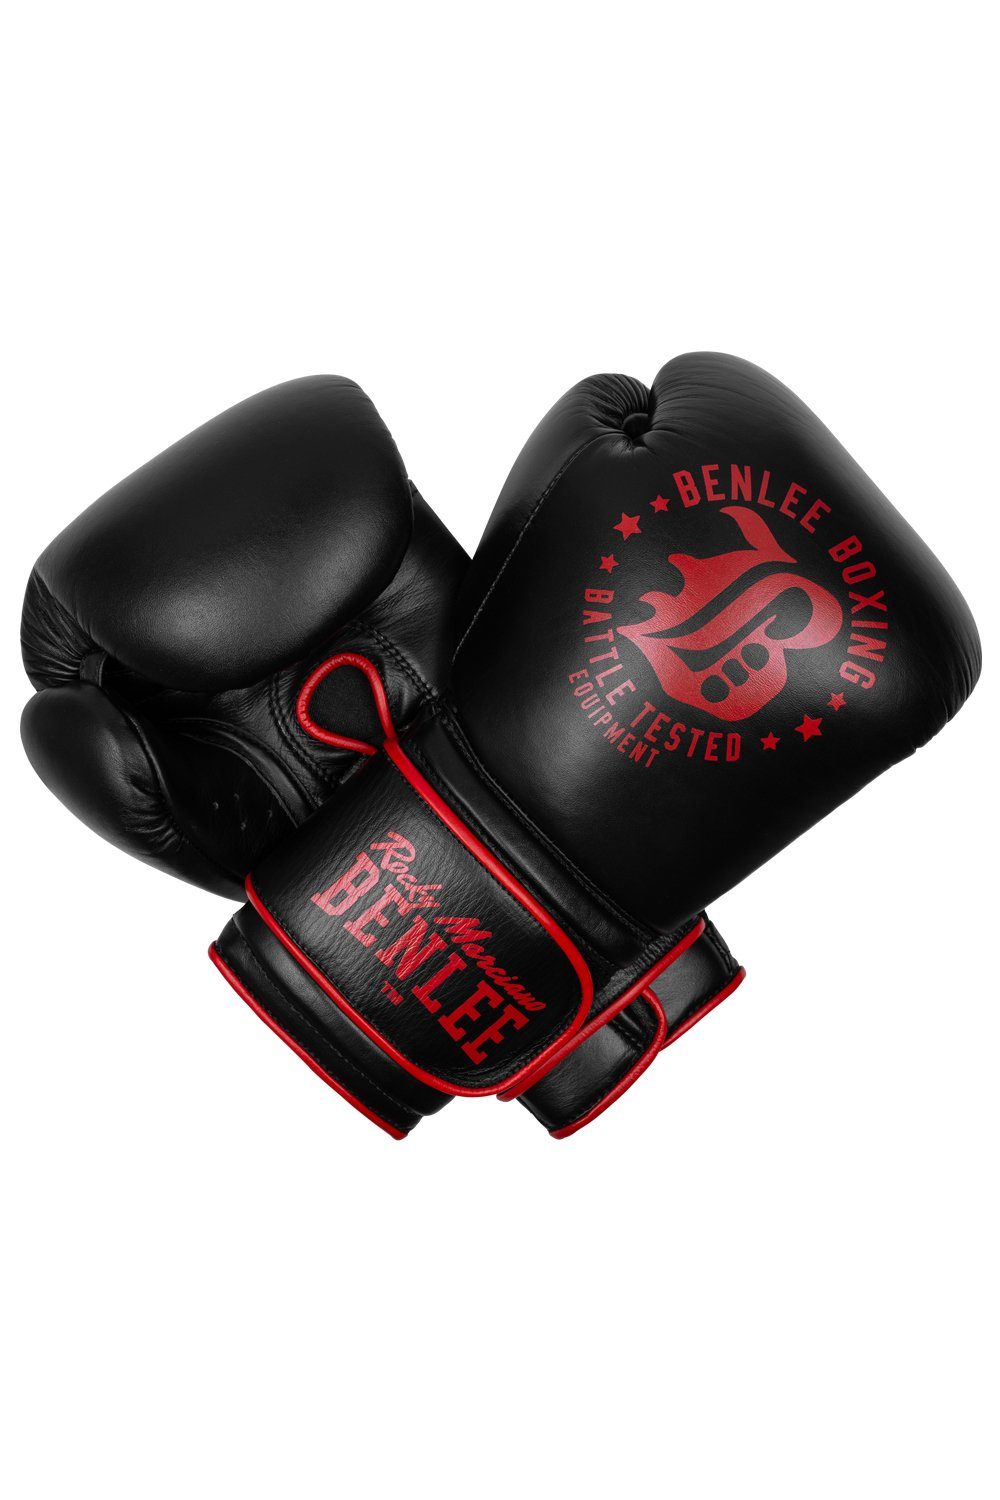 Boxhandschuhe TOXEY Rocky Benlee SPAR Marciano